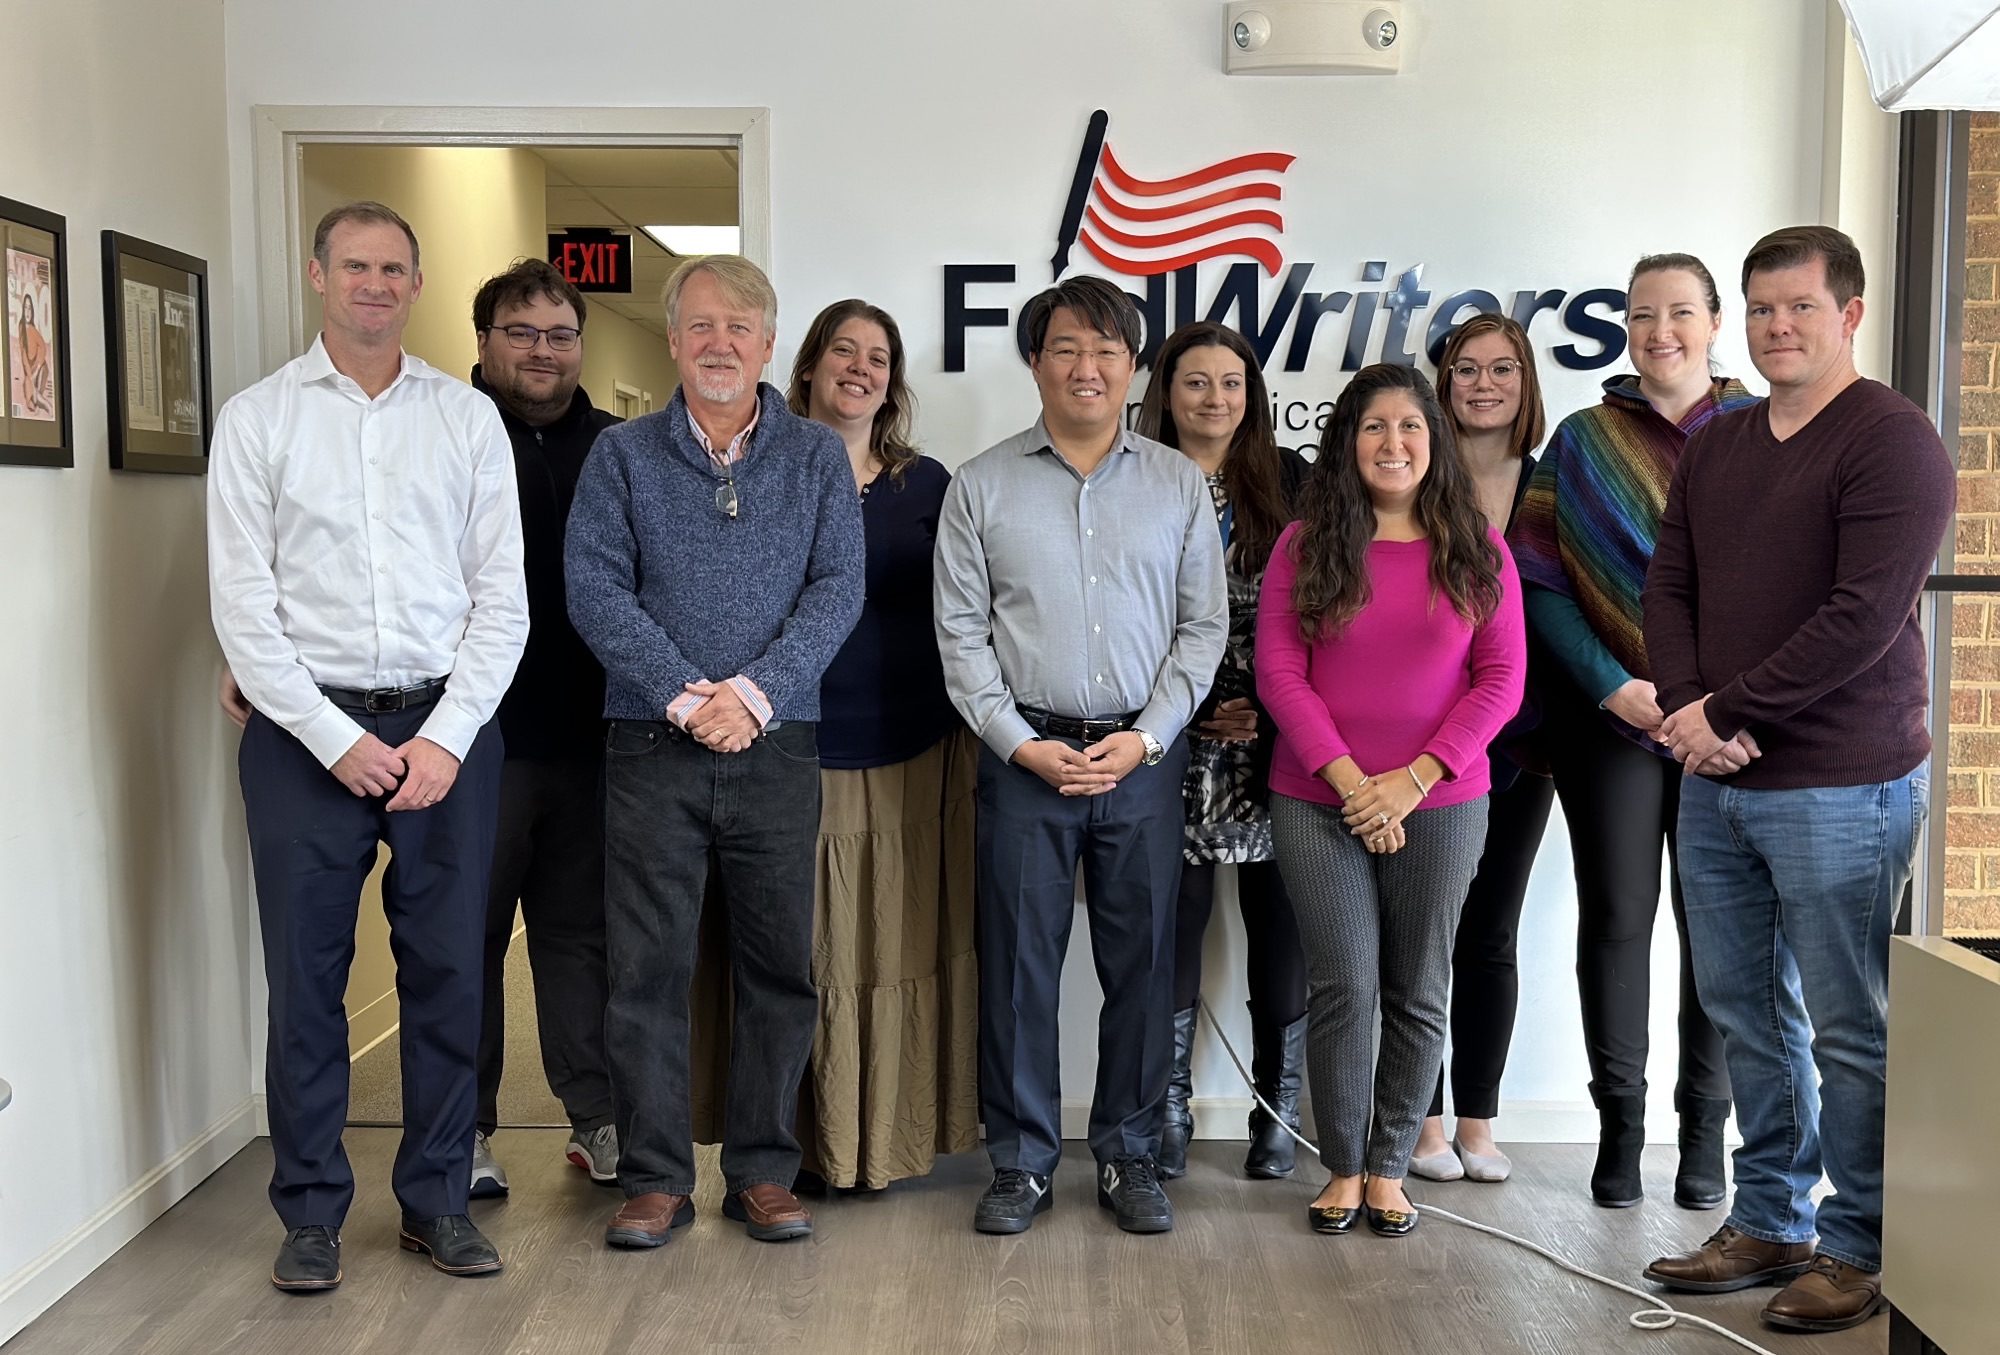 Eric Stone, Marc Fain, Mitchell Cho, Susan Parr, Abigail Casas, and Anthony Stong and FedWriters employees in the headquarters lobby.